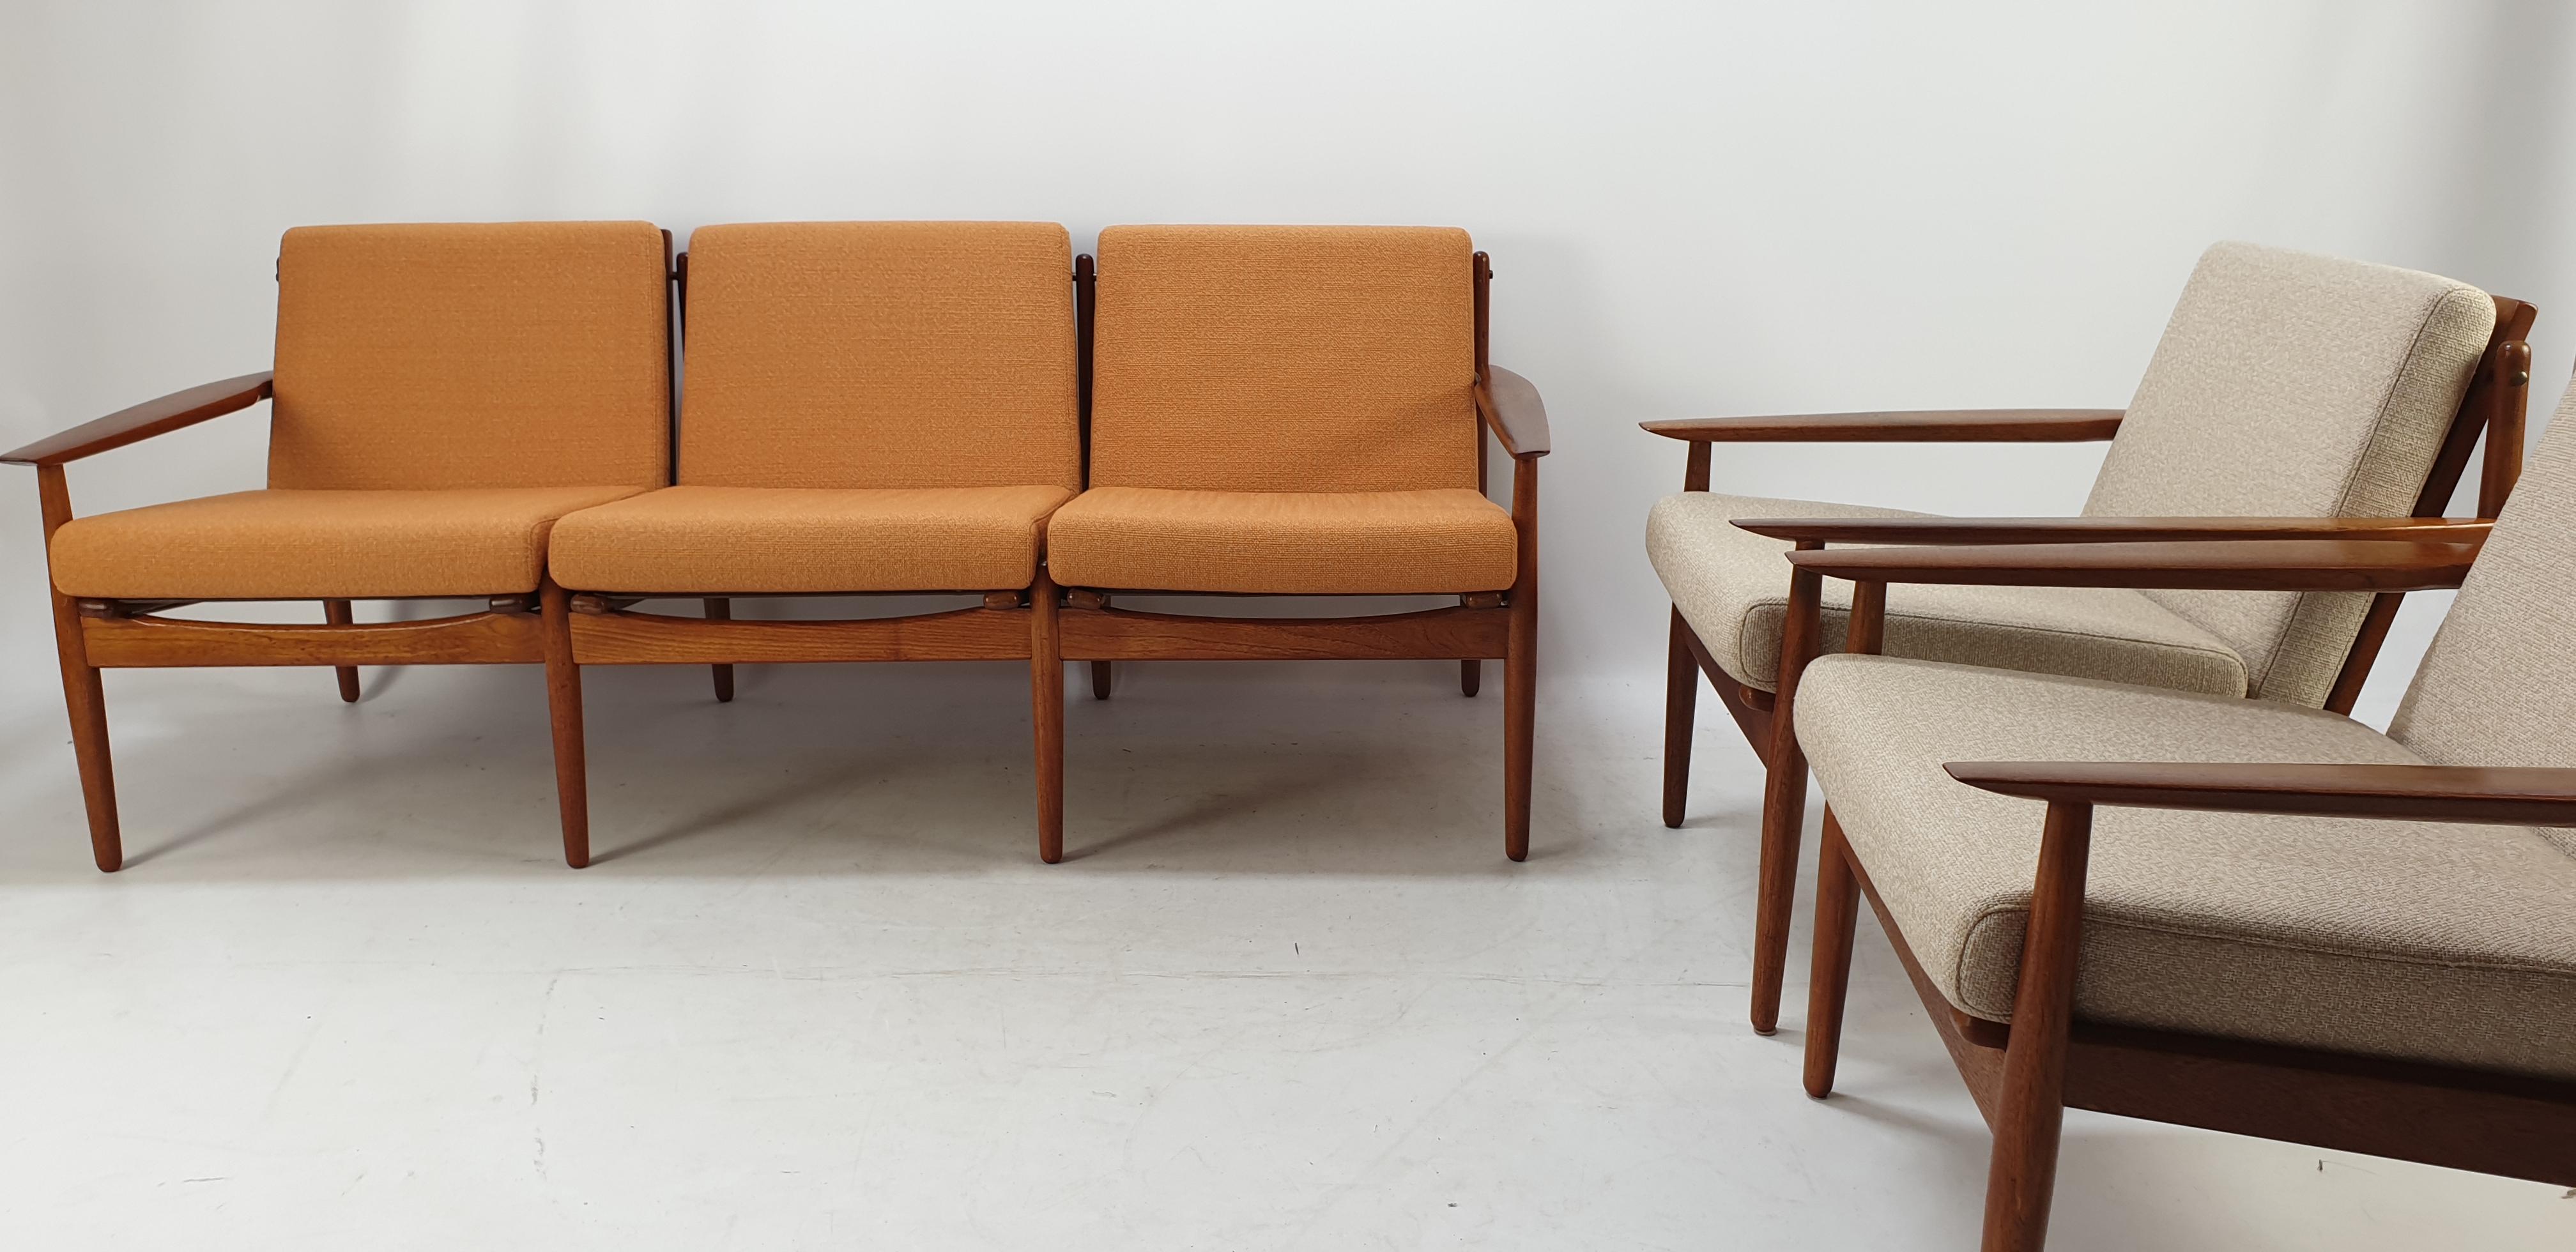 This elegant living room set was designed by Svend Åge Eriksen and manufactured in Denmark by Glostrup Møbelfabrik circa the 1960s. The beautiful set features a 3-seater sofa and two lounge chairs. The pieces have teak wood frames and sculpted